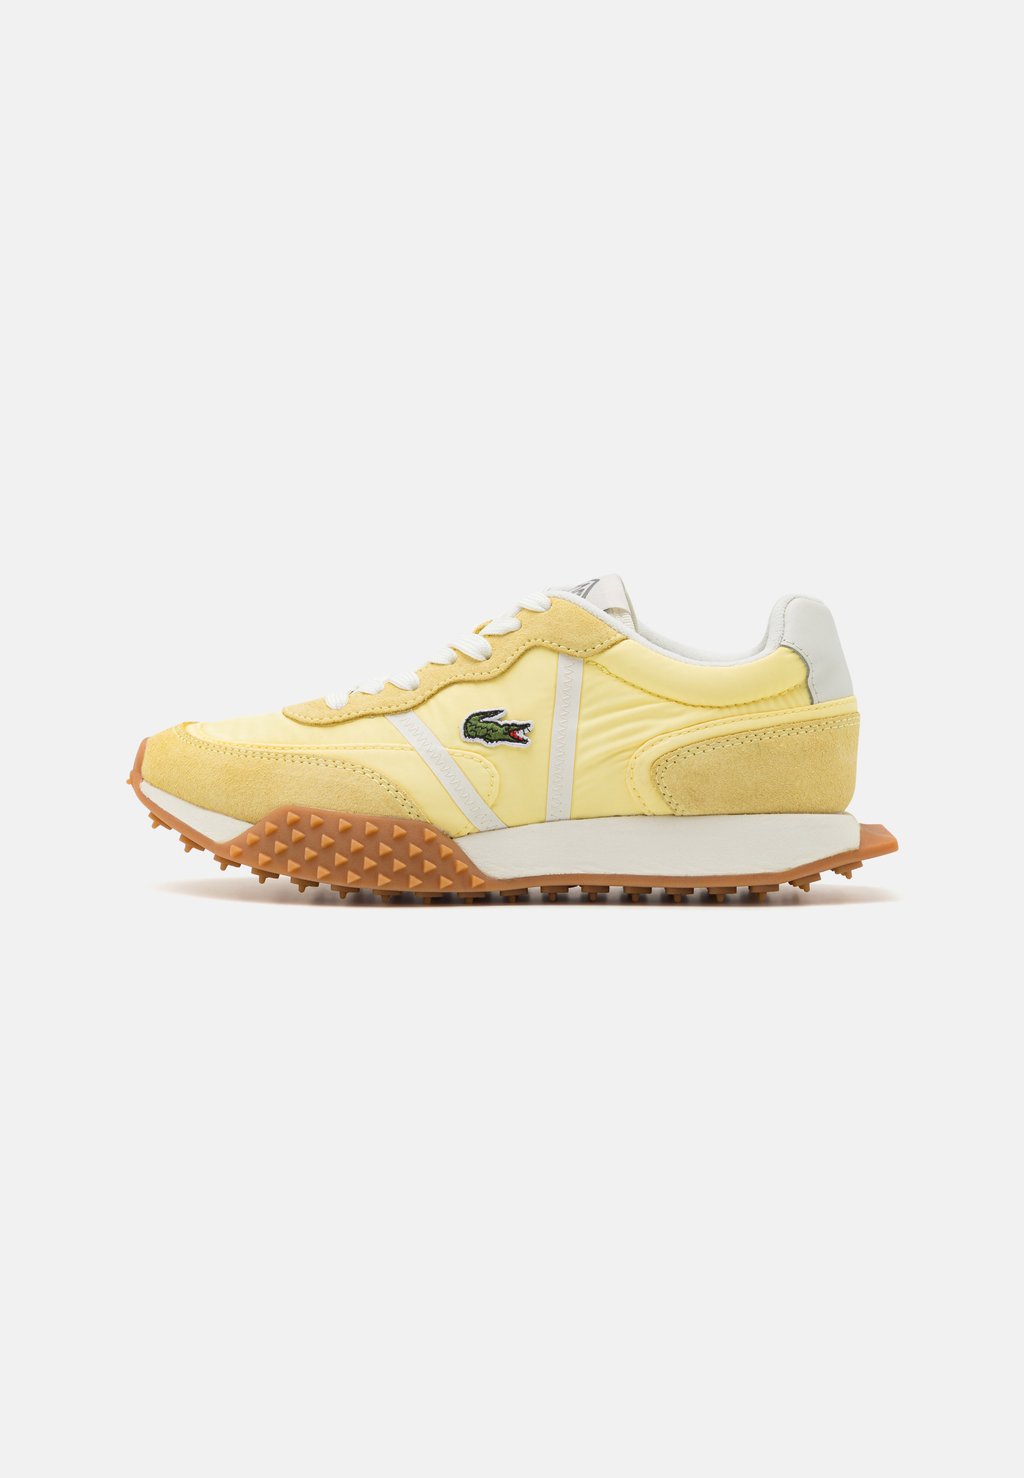 Кроссовки низкие L-SPIN DELUXE 3.0 Lacoste, цвет light yellow/off white кроссовки lacoste l spin deluxe 124 3 sma цвет off white natural